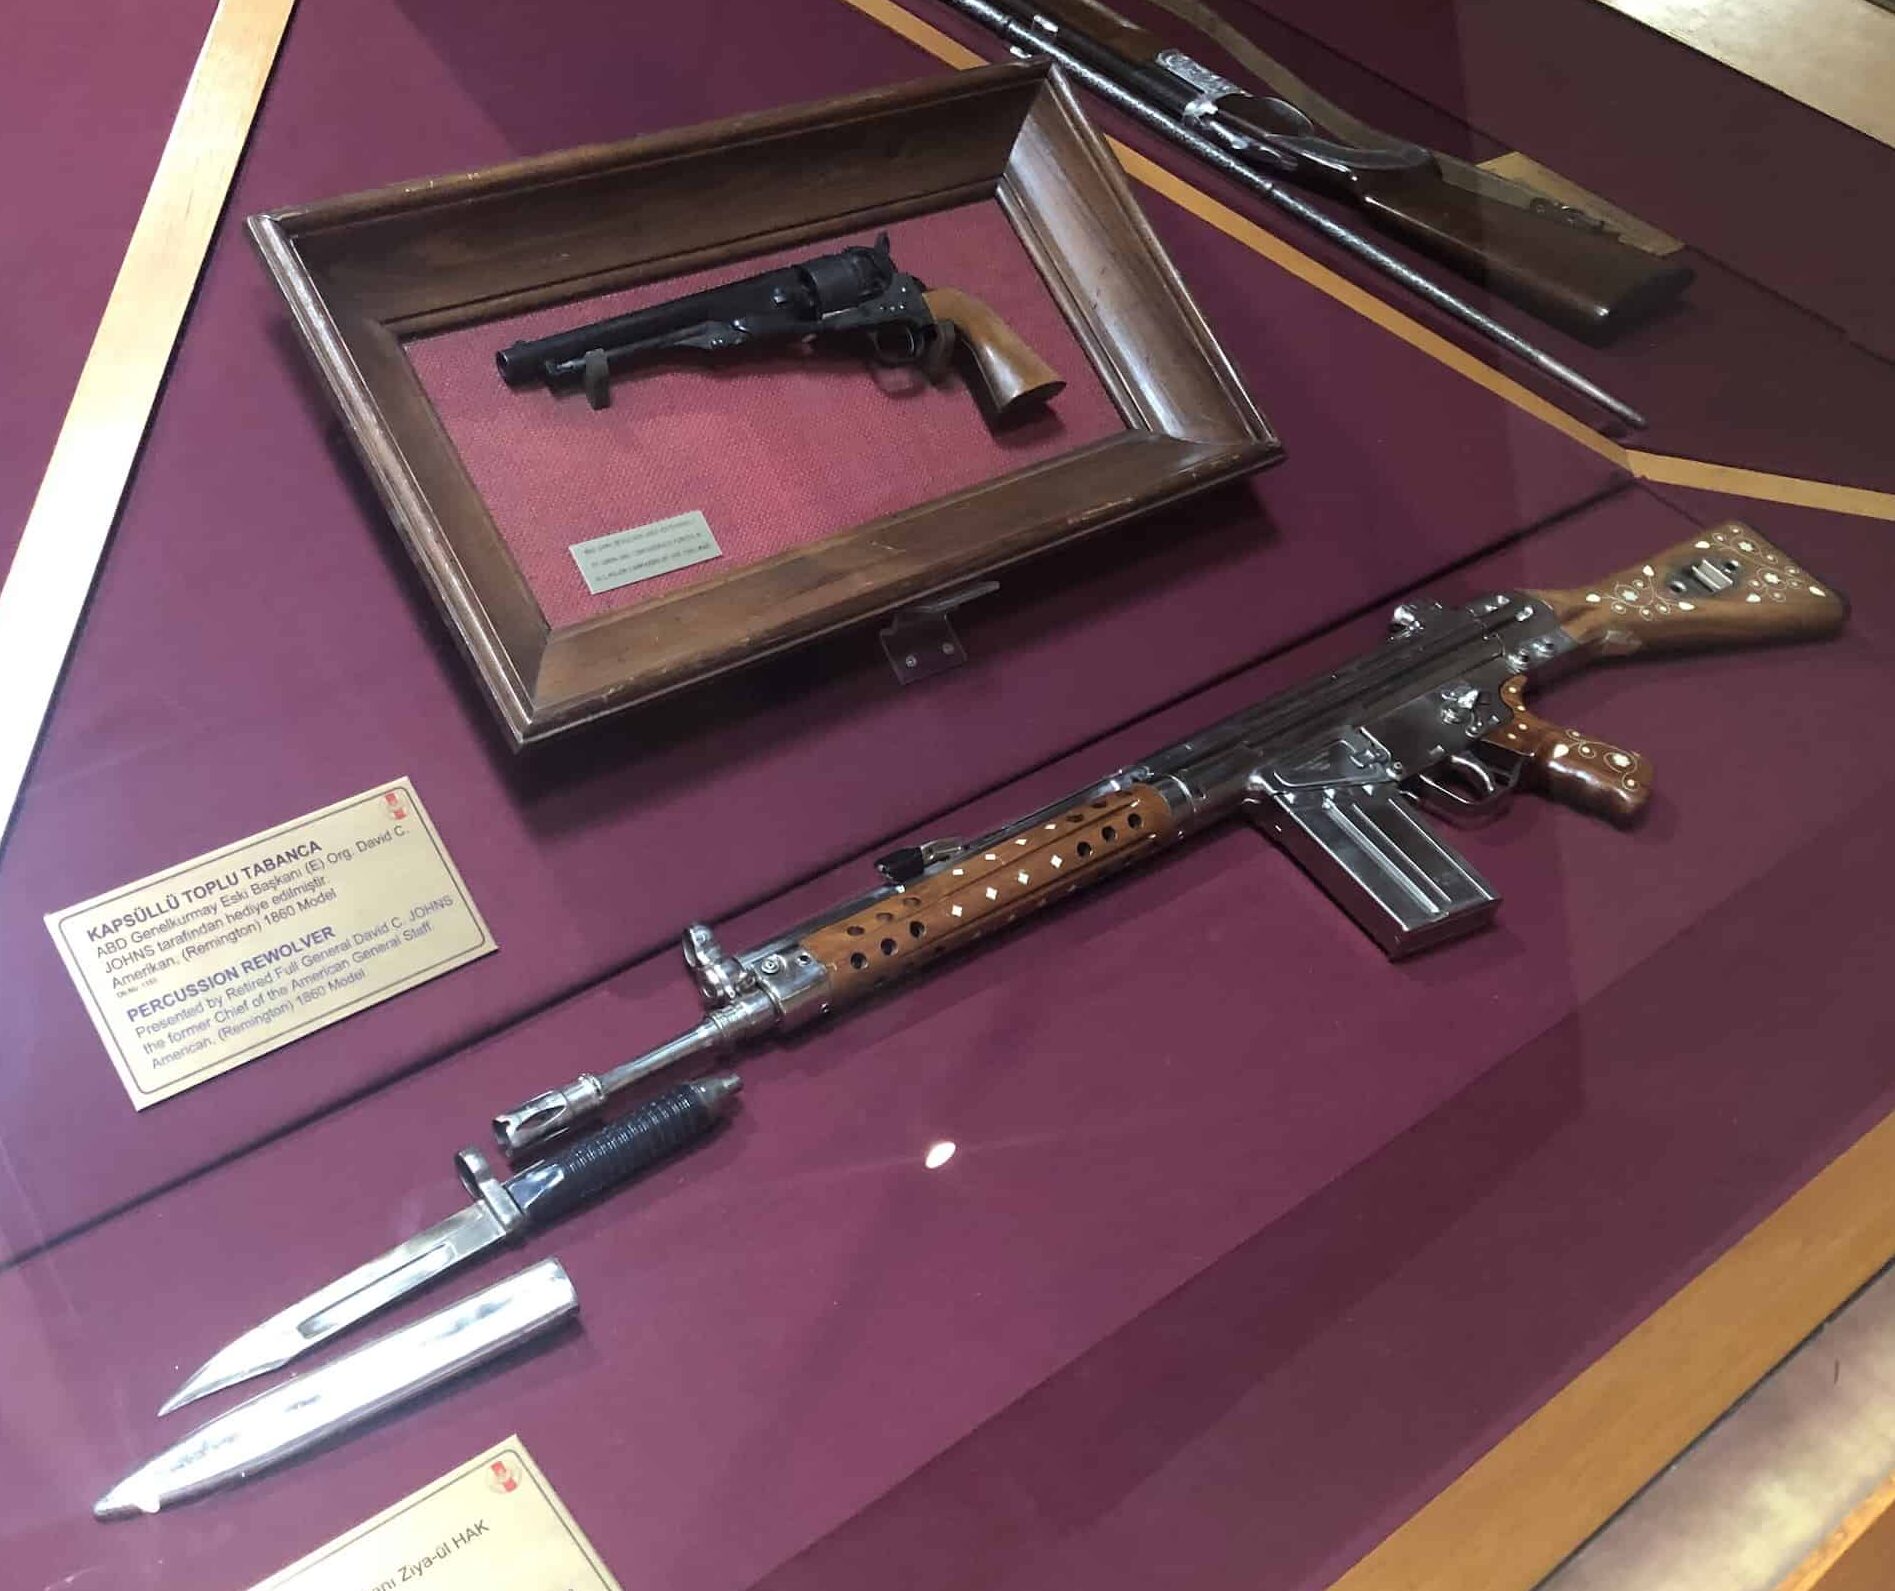 Revolver from the United States (top) and rifle from Pakistan